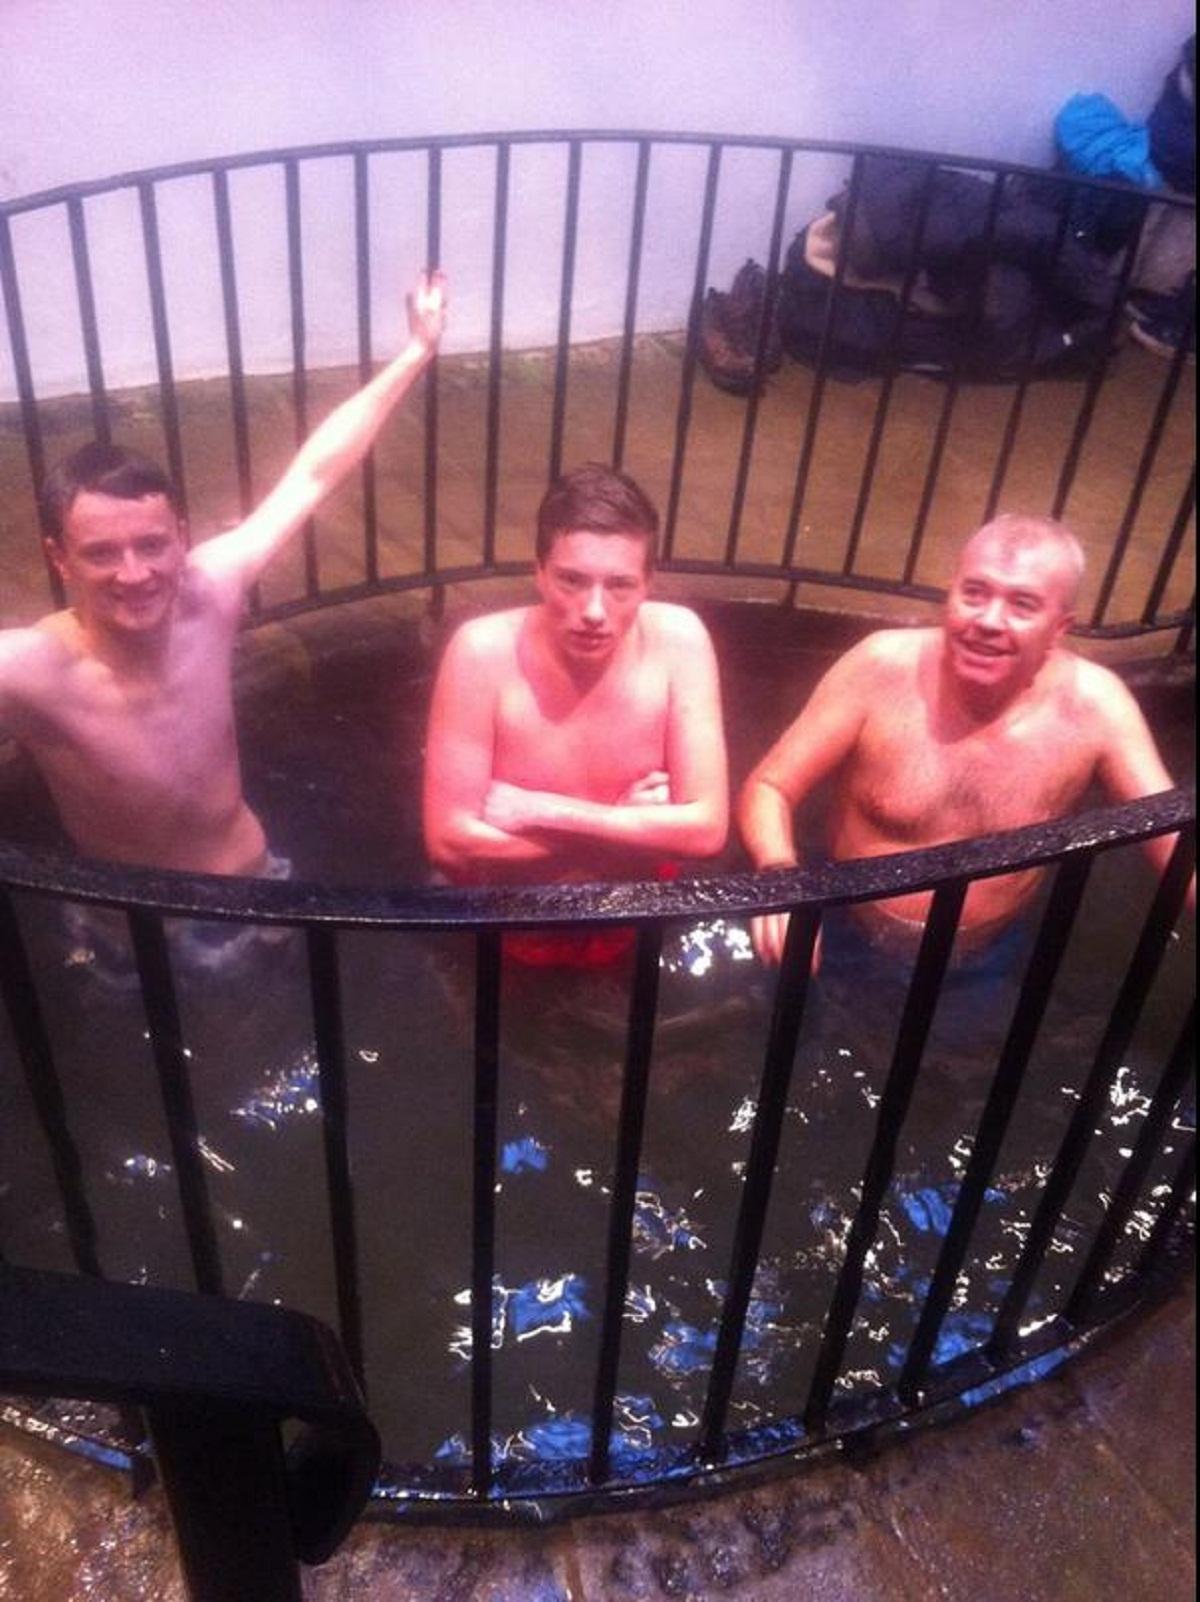 In the plunge pool are, from left, Andrew Lorimer, Ross McMillan and John Dowley